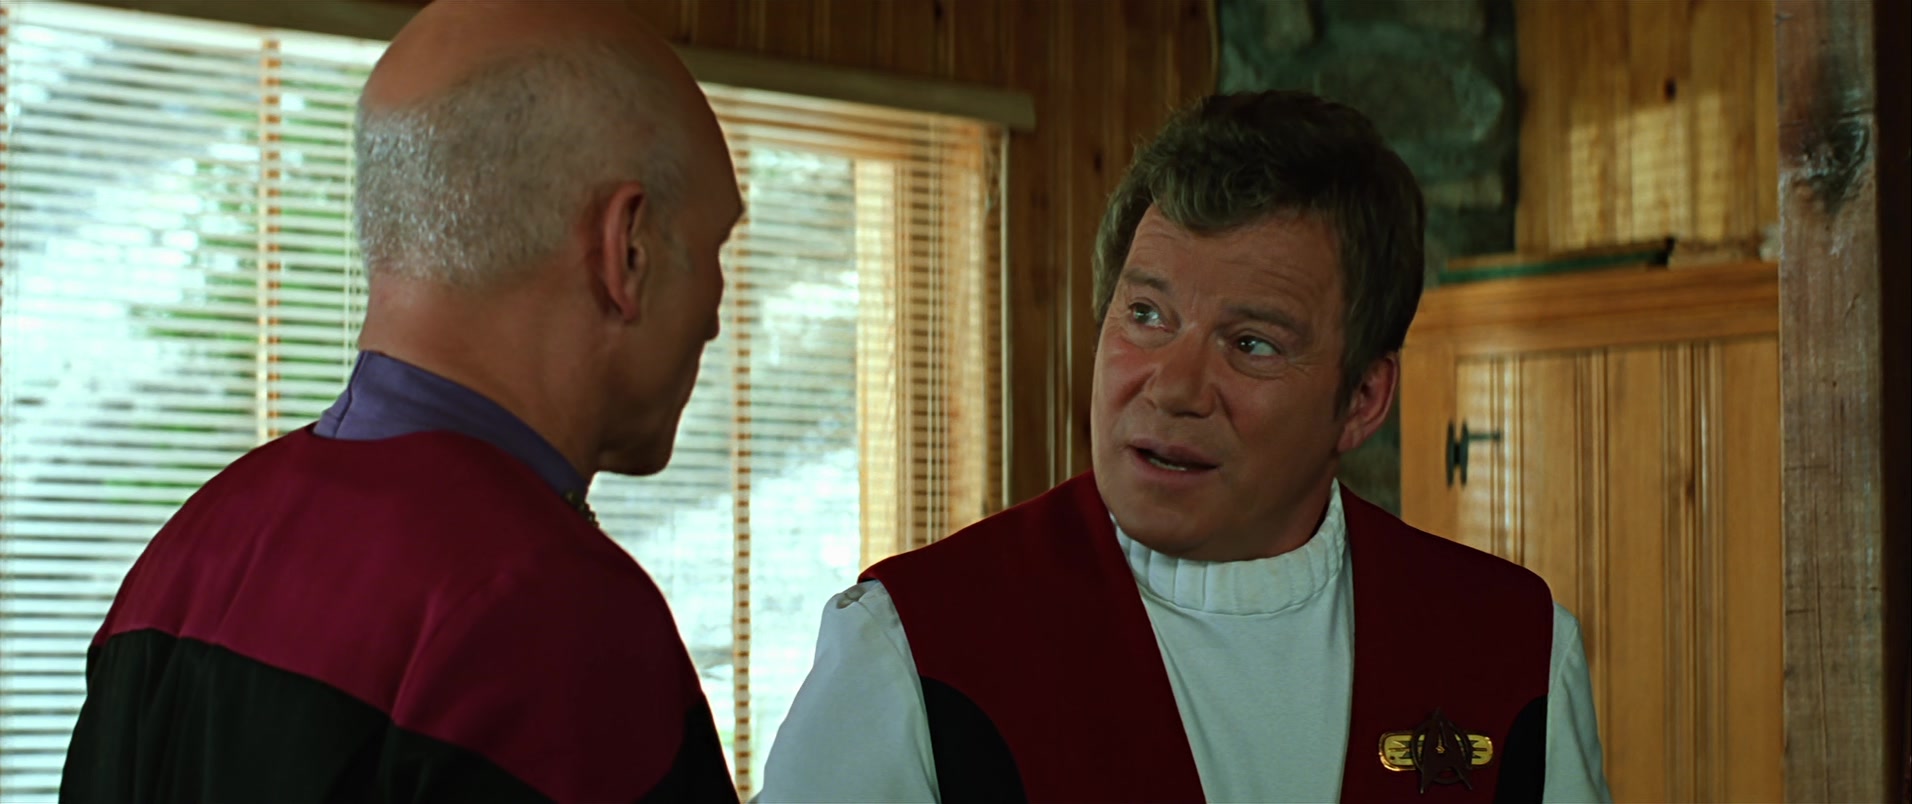 Captain Kirk (William Shatner) explains his dissatisfaction with life within the Nexus to Captain Picard (Patrick Stewart) in Star Trek Generations (1994), Paramount Pictures via Blu-ray